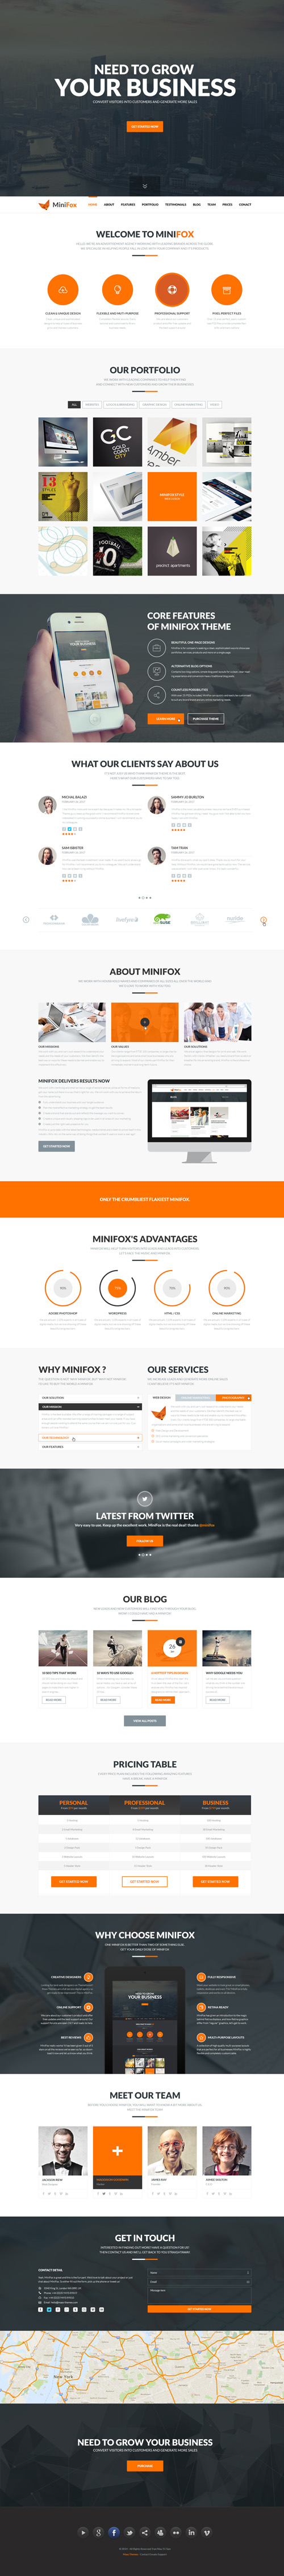 One Page Business Psd Templates  Design  Graphic Design Junction Intended For One Page Business Website Template